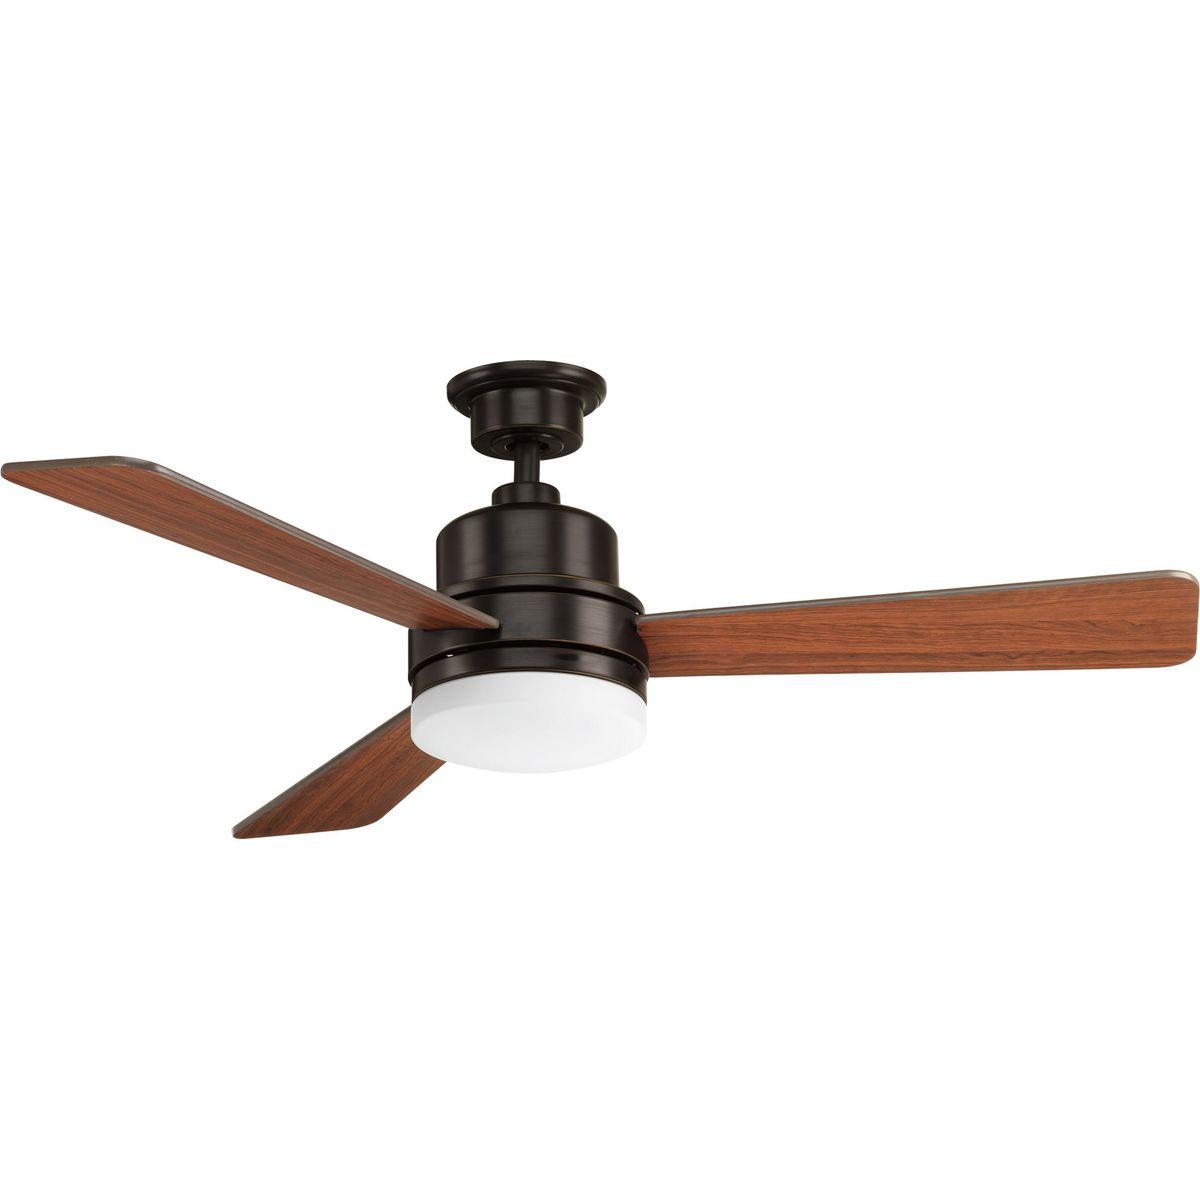 Hubbell P2556-2030K The 52 inch Trevina II features three reversible blades in medium cherry and classic walnut in Antique Bronze finish. Coolly modern, the Trevina II ceiling fan offers both form and function with an energy efficient 17W LED source with a 3000K-color temper